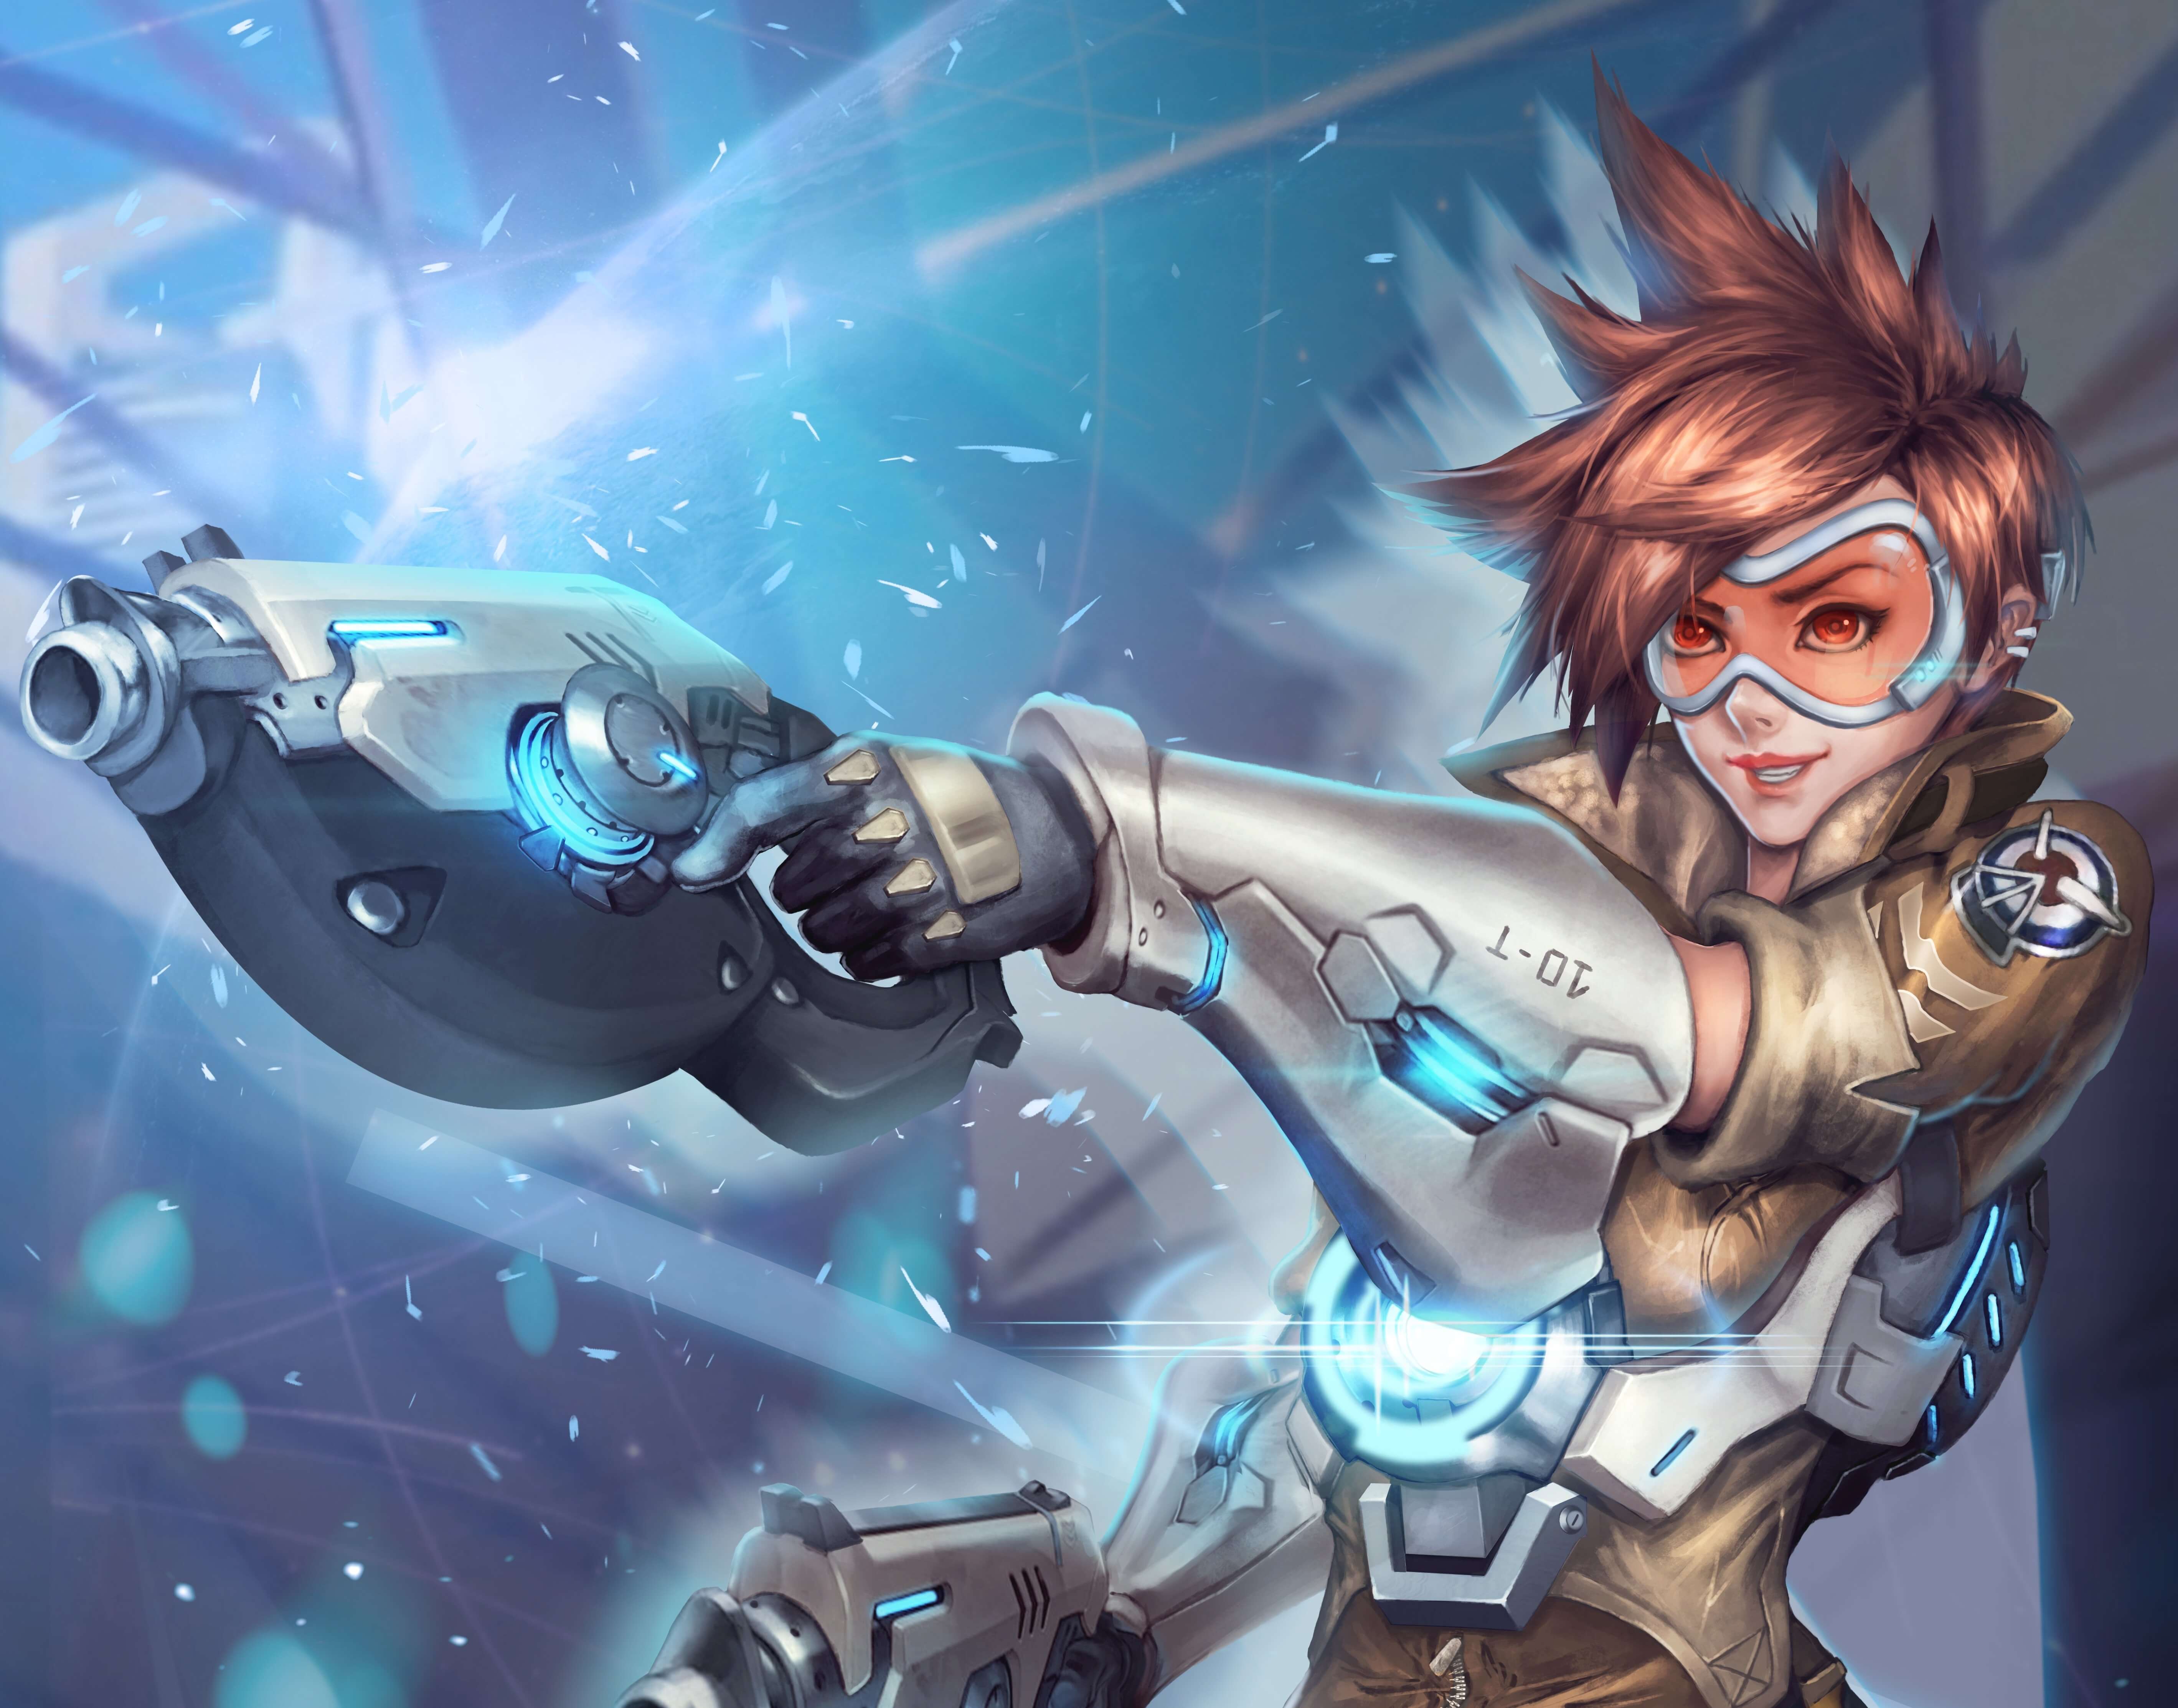 Video Game Overwatch Tracer (Overwatch) Wallpaper  Overwatch wallpapers,  Overwatch mobile wallpaper, Overwatch phone wallpaper